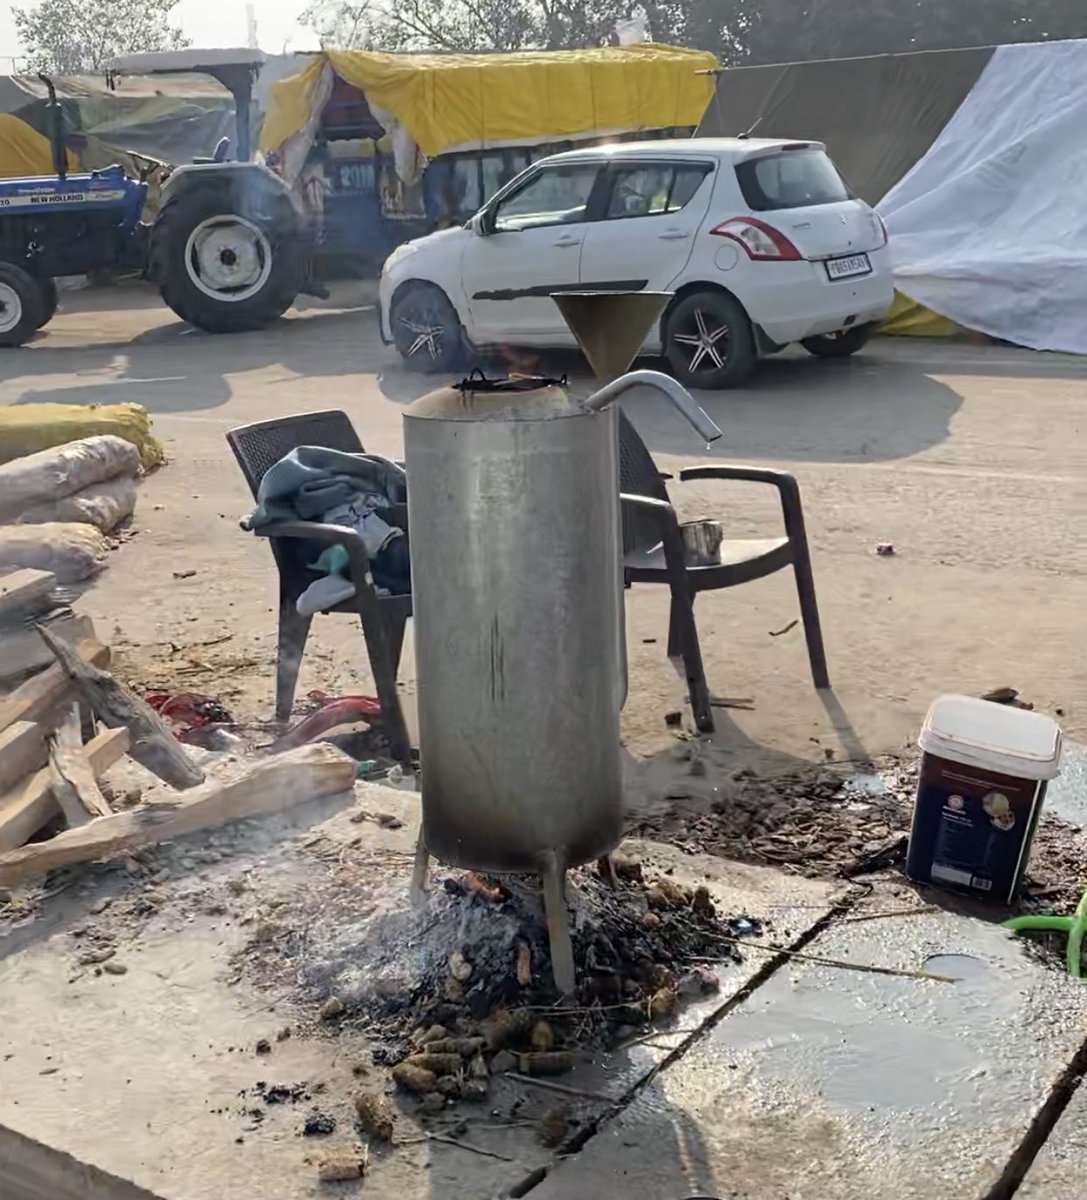 3)  #FarmersProtestHijacked It didn’t like a  #Farmers protest at all. The camp setup near  #Murthal was setup in a very organised way. Hot water Hamam for bathing,fire wood stock all neatly stacked up like in a cantonment area or a forward military unit. With plenty of water supply